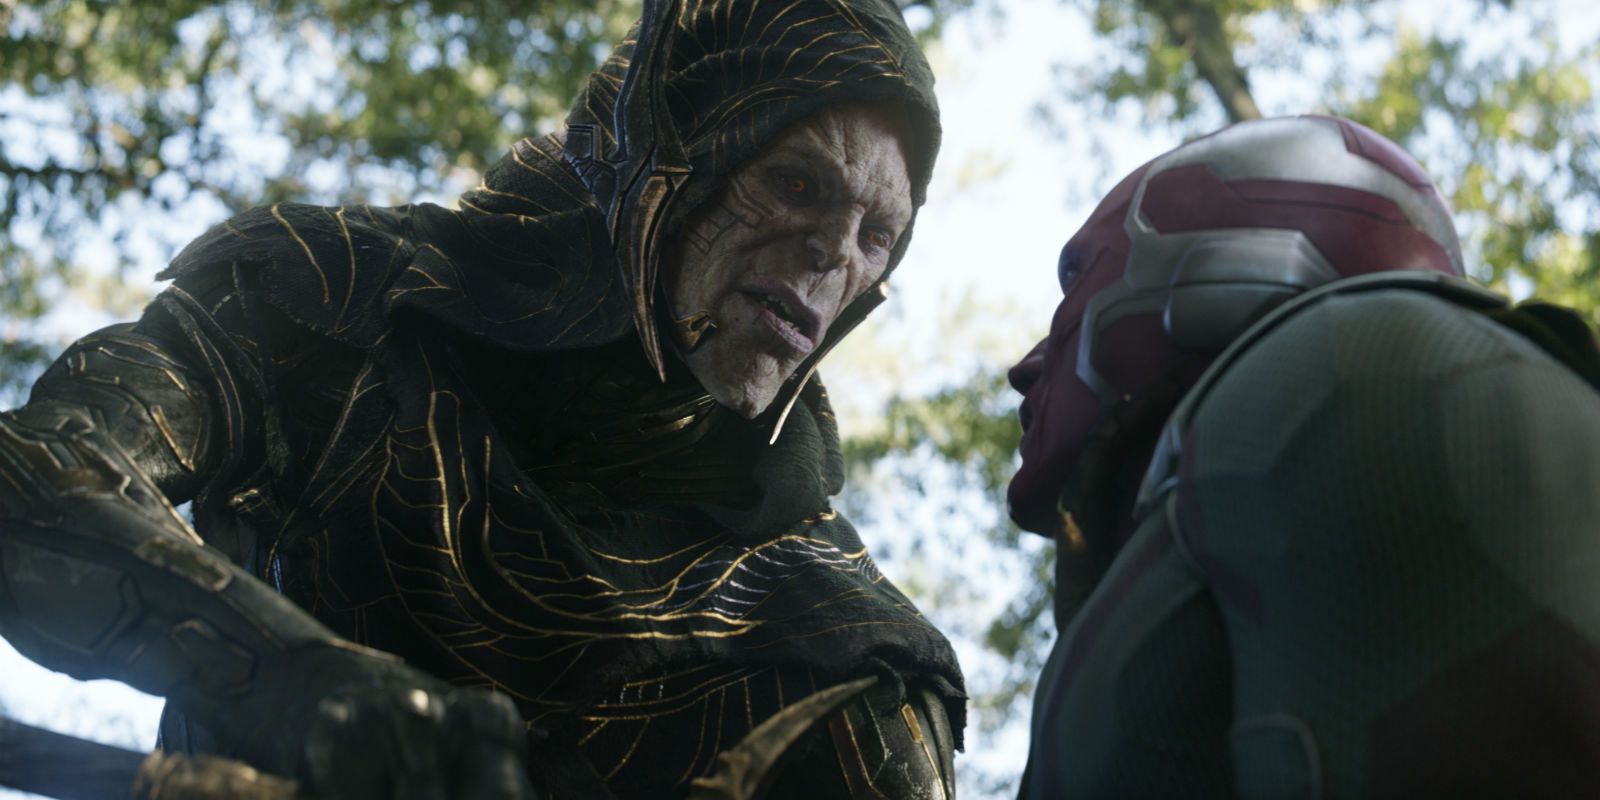 Avengers Infinity War - Corvus Glaive and Vision